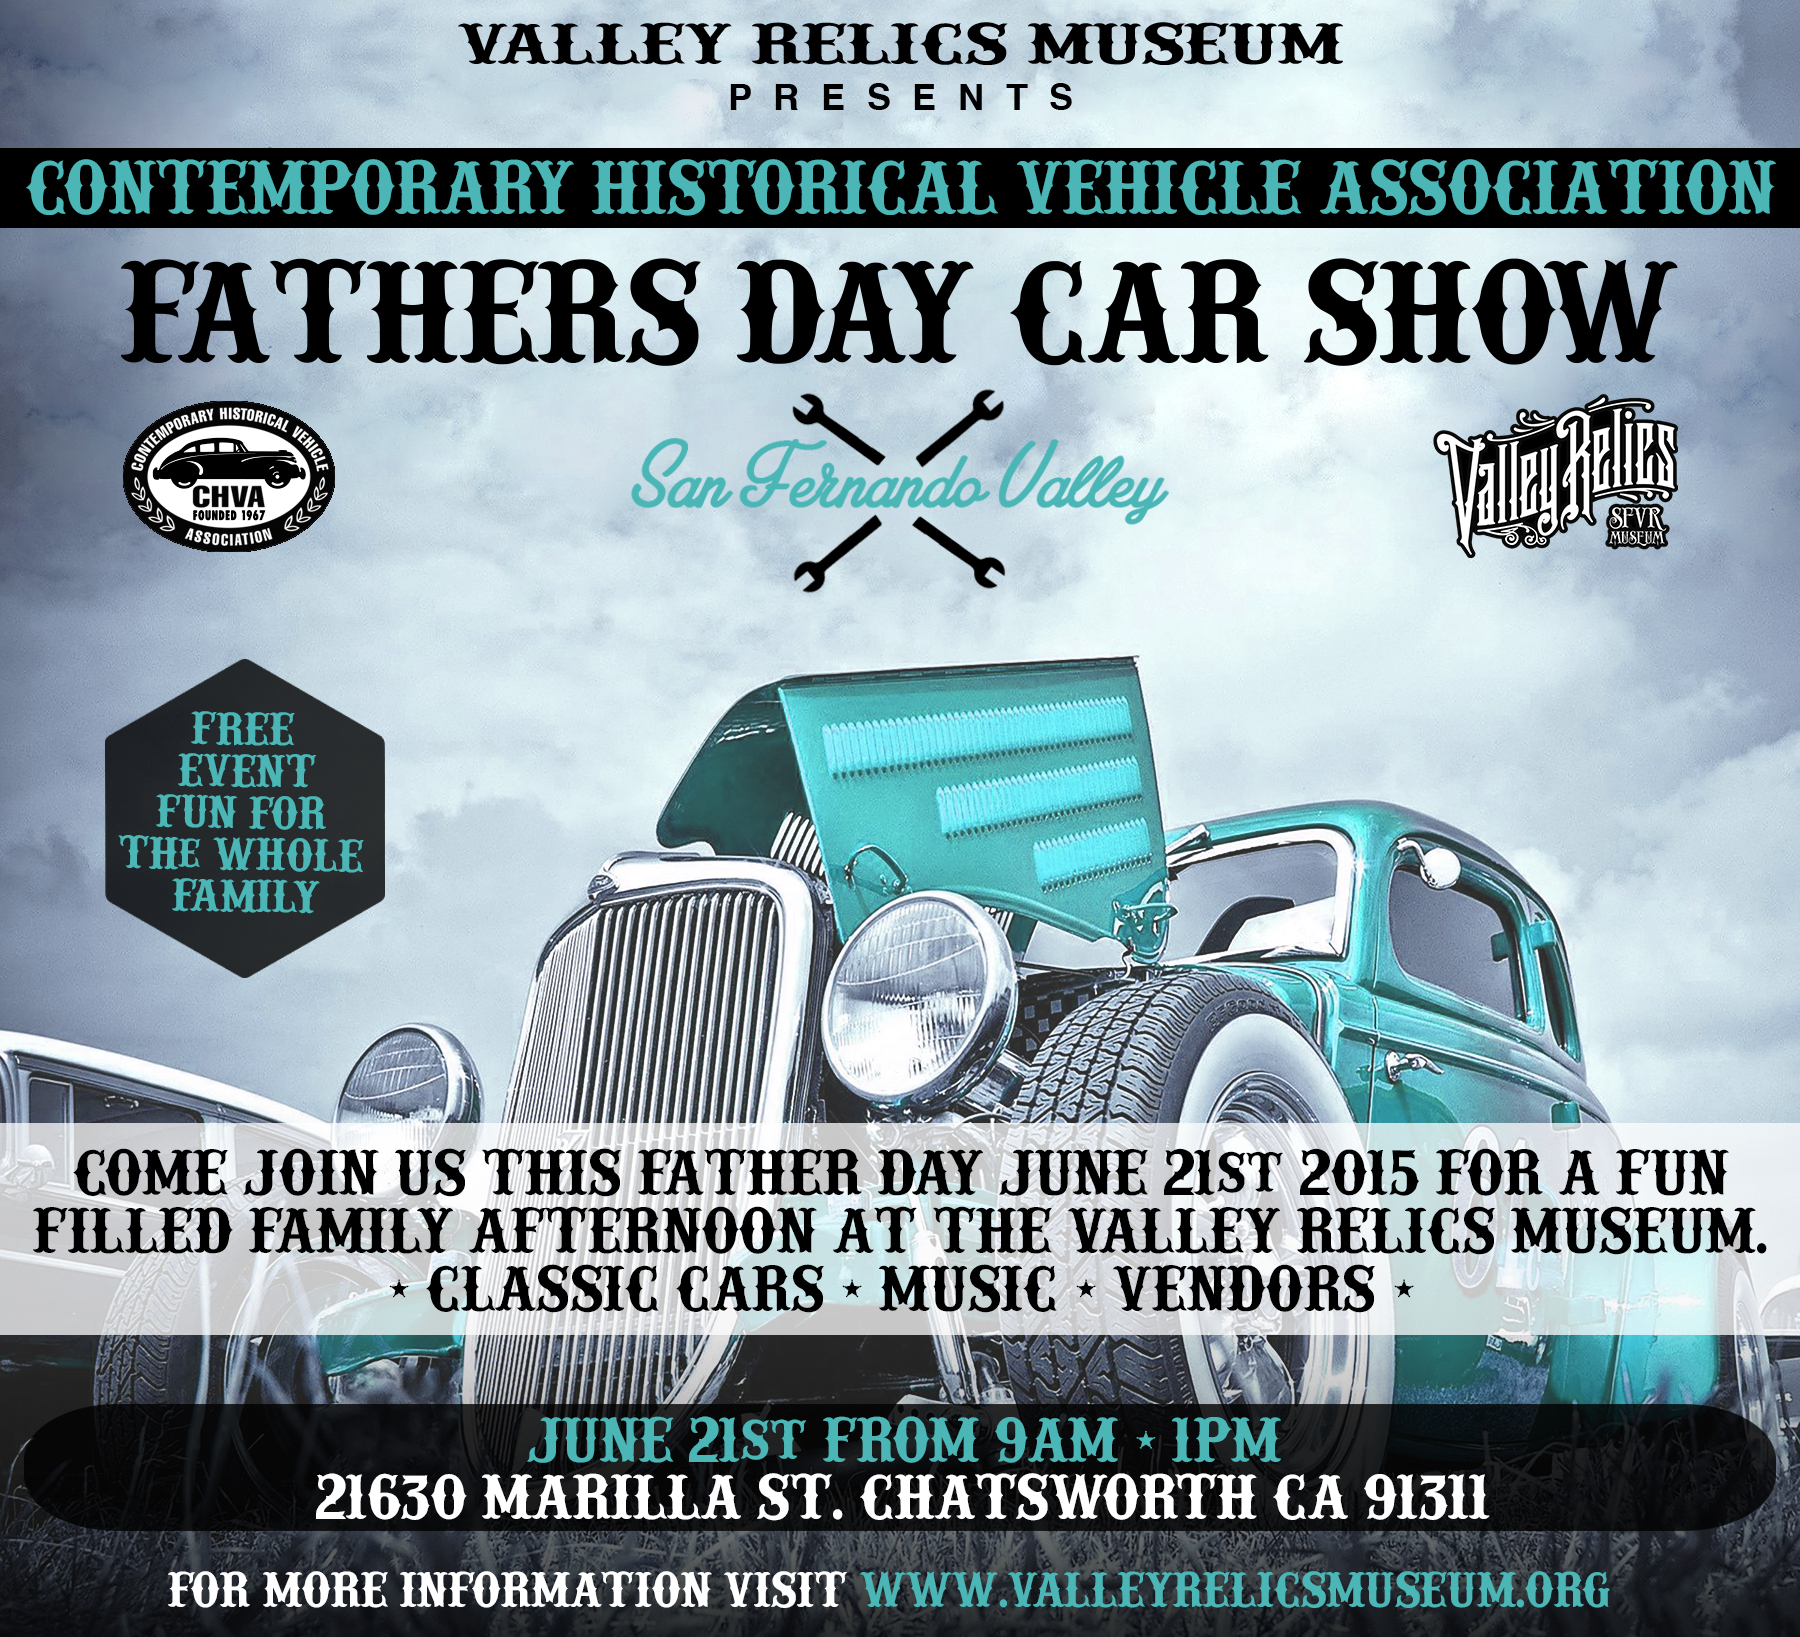 The Contemporary Historical Vehicle Association Father's Day Car Show